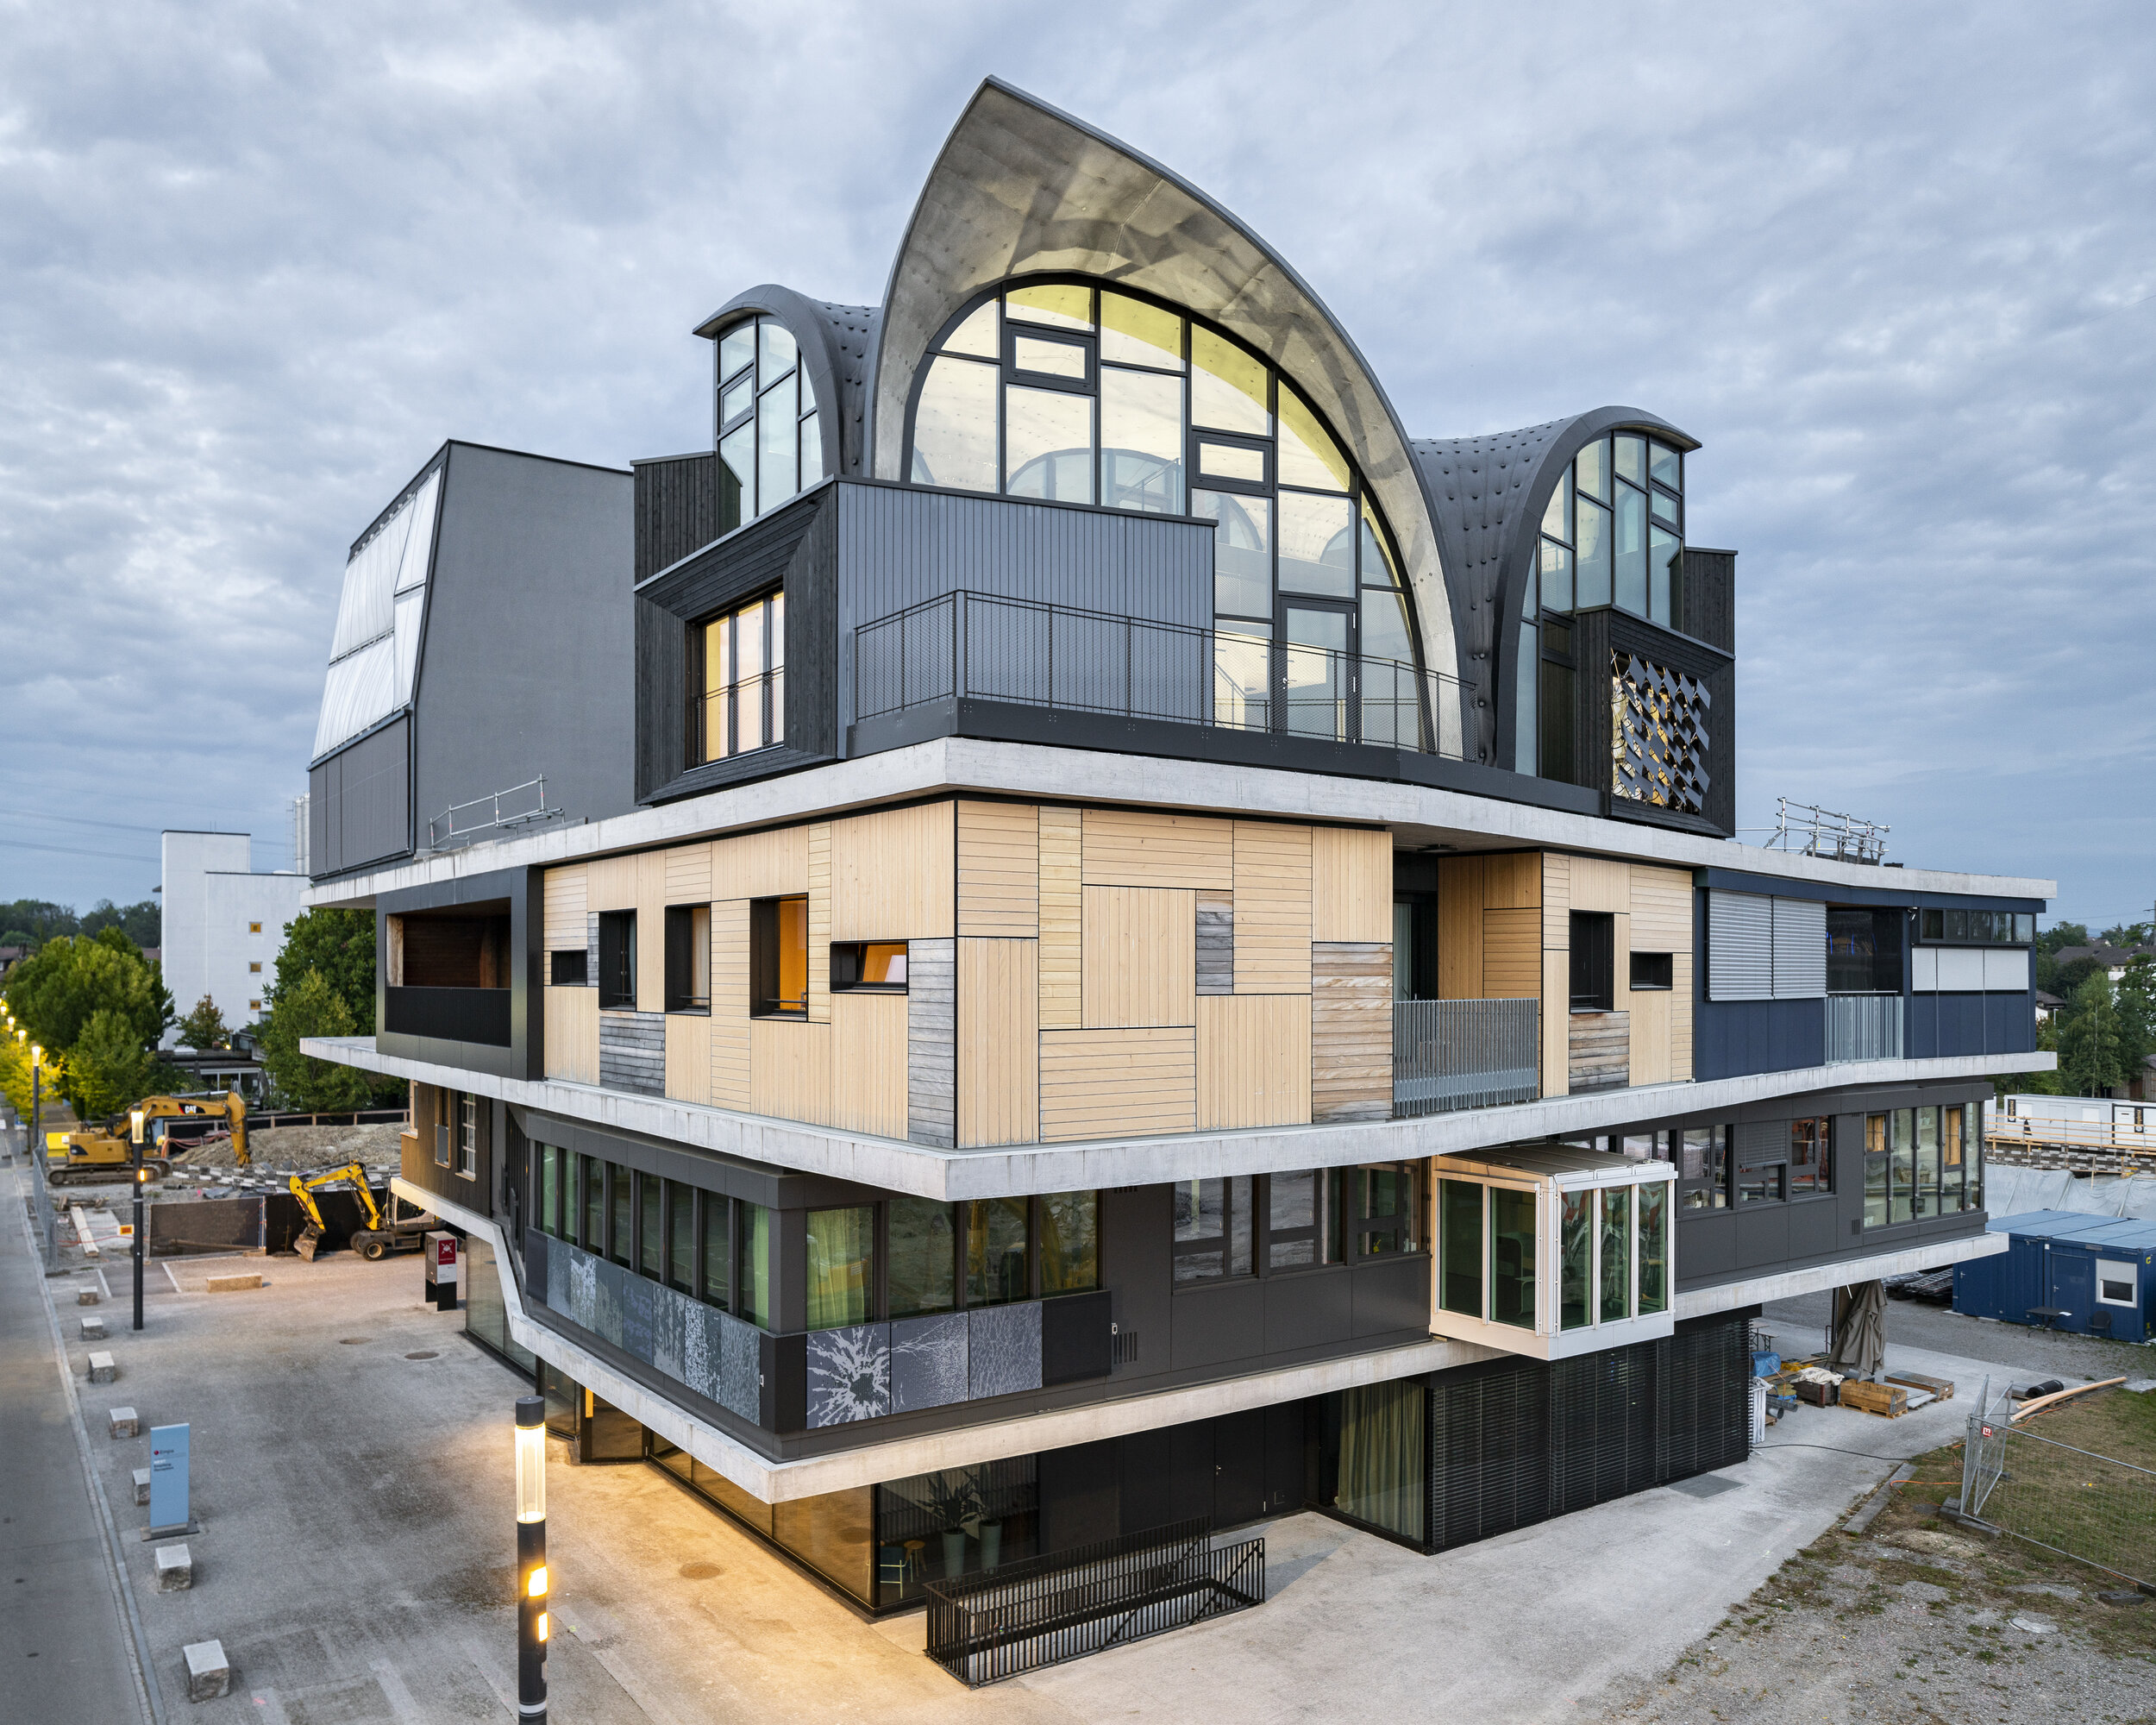 The HiLo unit sits on the top platform of the NEST research and innovation building on the Empa campus in Dubendorf, Switzerland. Photo: Roman Keller (Copy)